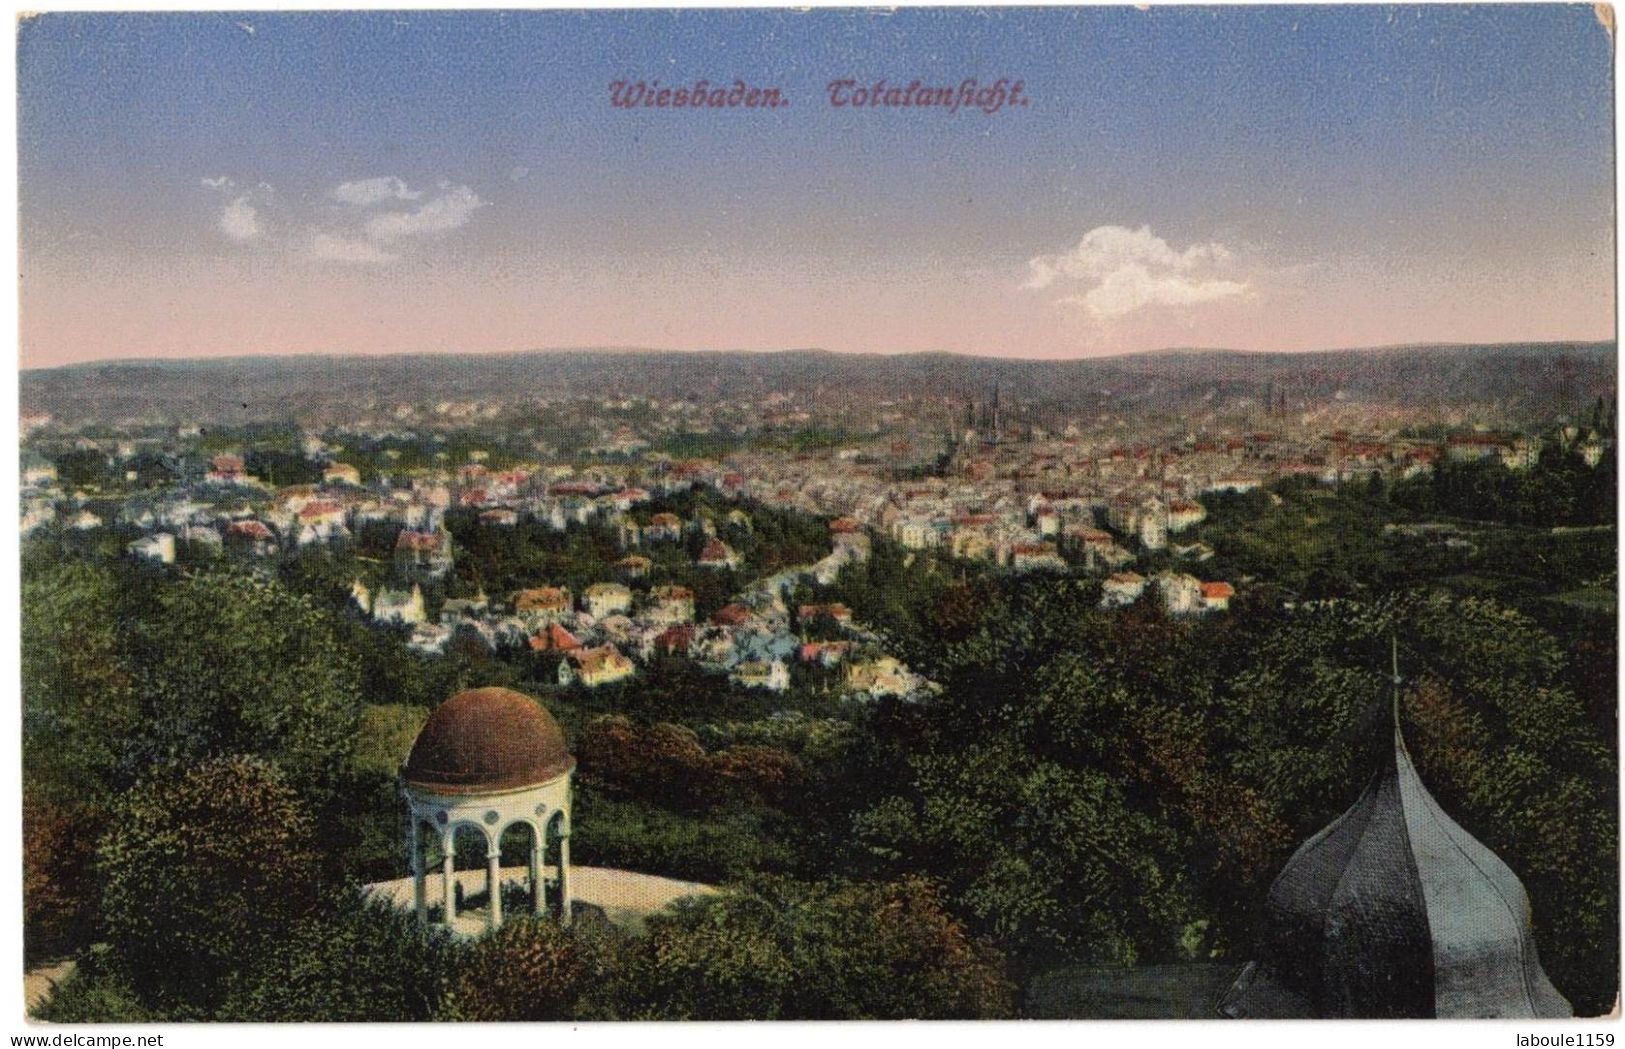 ALLEMAGNE GERMANY HESSE WIESBADEN : TOTALANSICHT - EDITION COLORISEE - Turismo